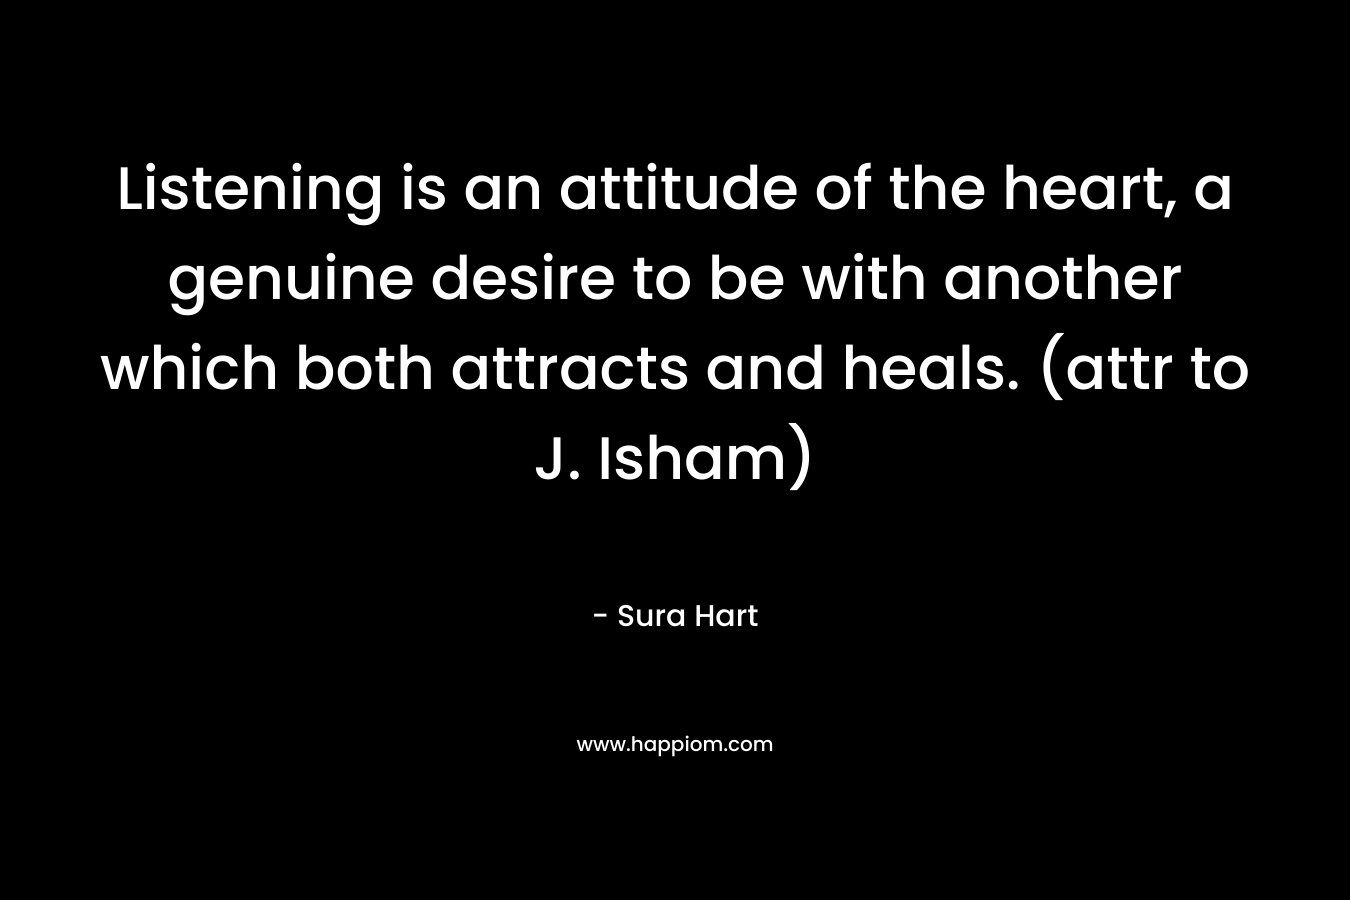 Listening is an attitude of the heart, a genuine desire to be with another which both attracts and heals. (attr to J. Isham) – Sura Hart